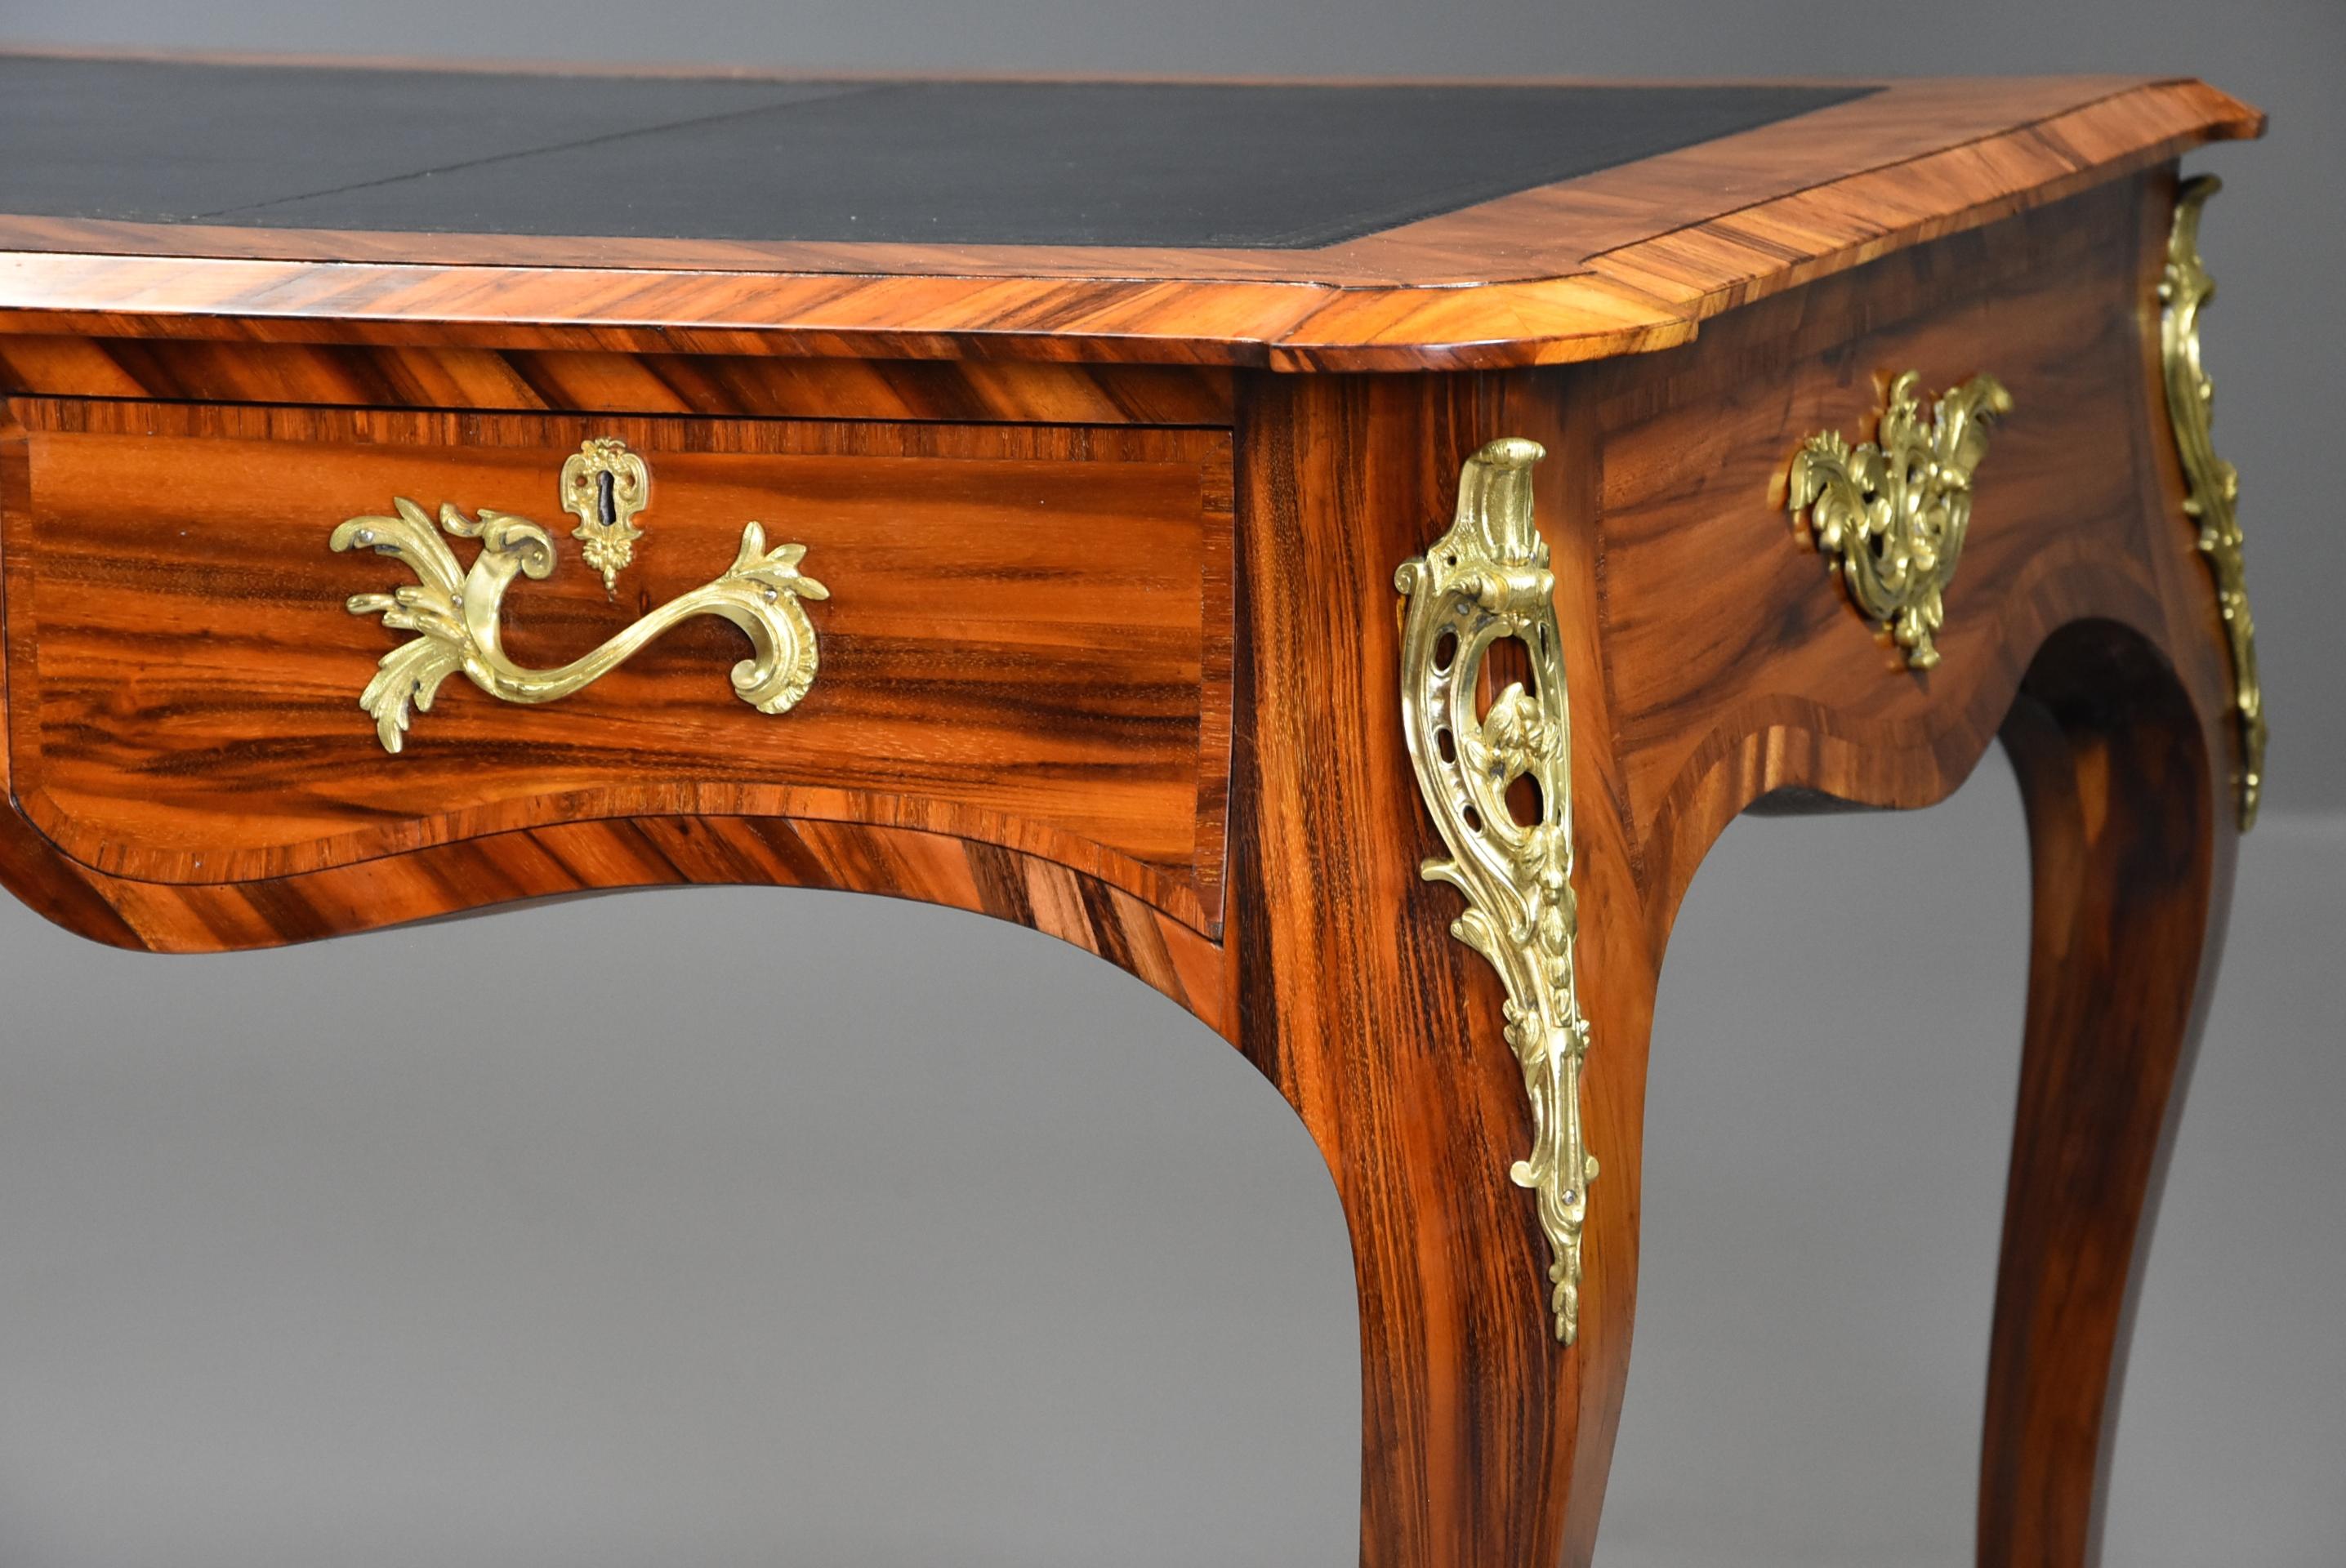 Fine Quality Mid-19th Century Goncalo Alves Bureau Plat in the French Style For Sale 1